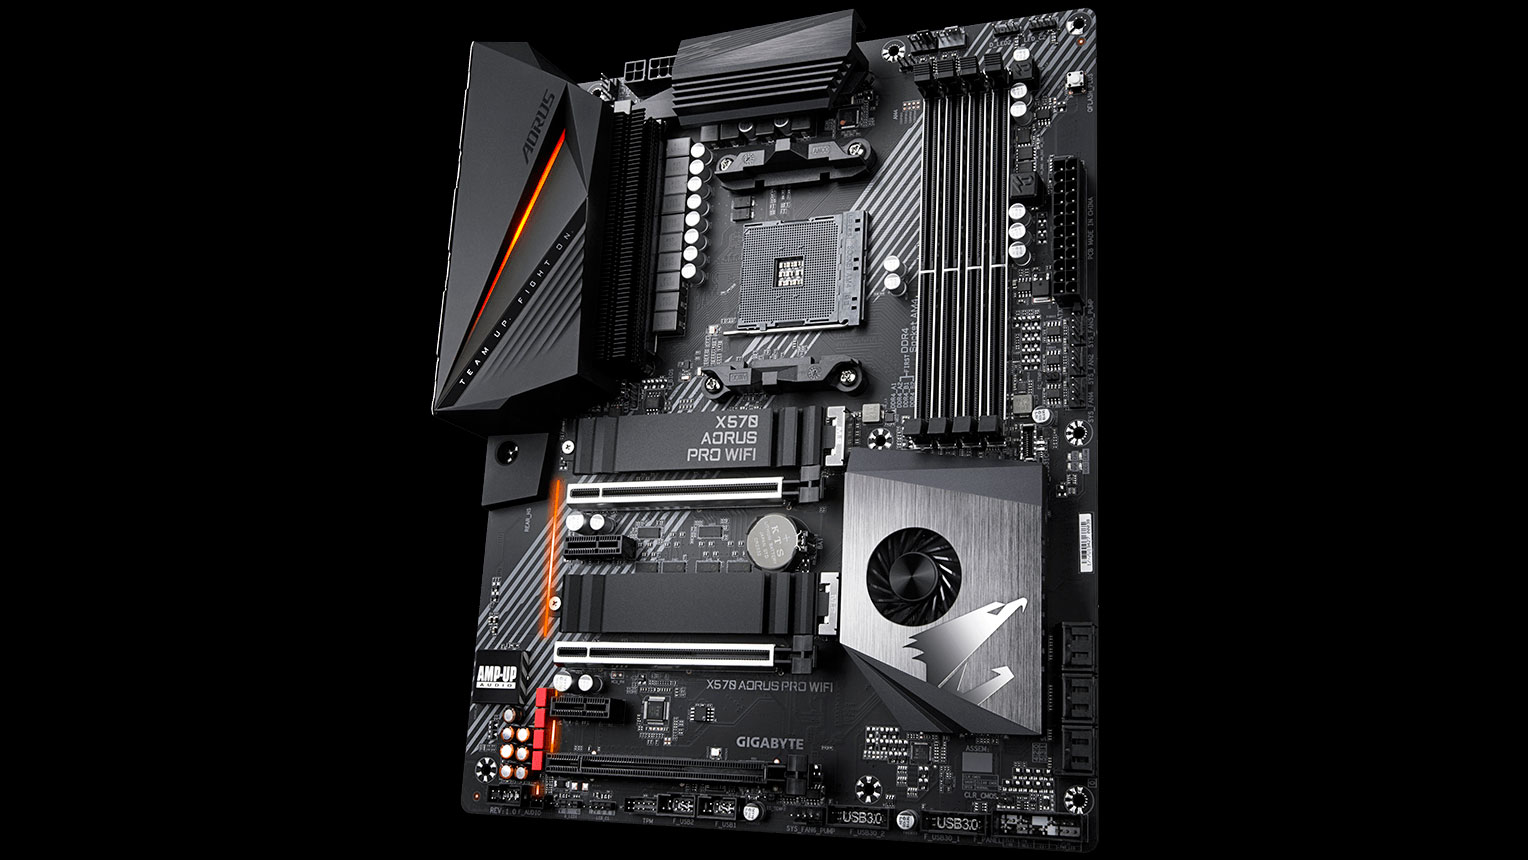 amd-x570s-motherboard-pops-up-with-a-ryzen-7-5700g-cpu